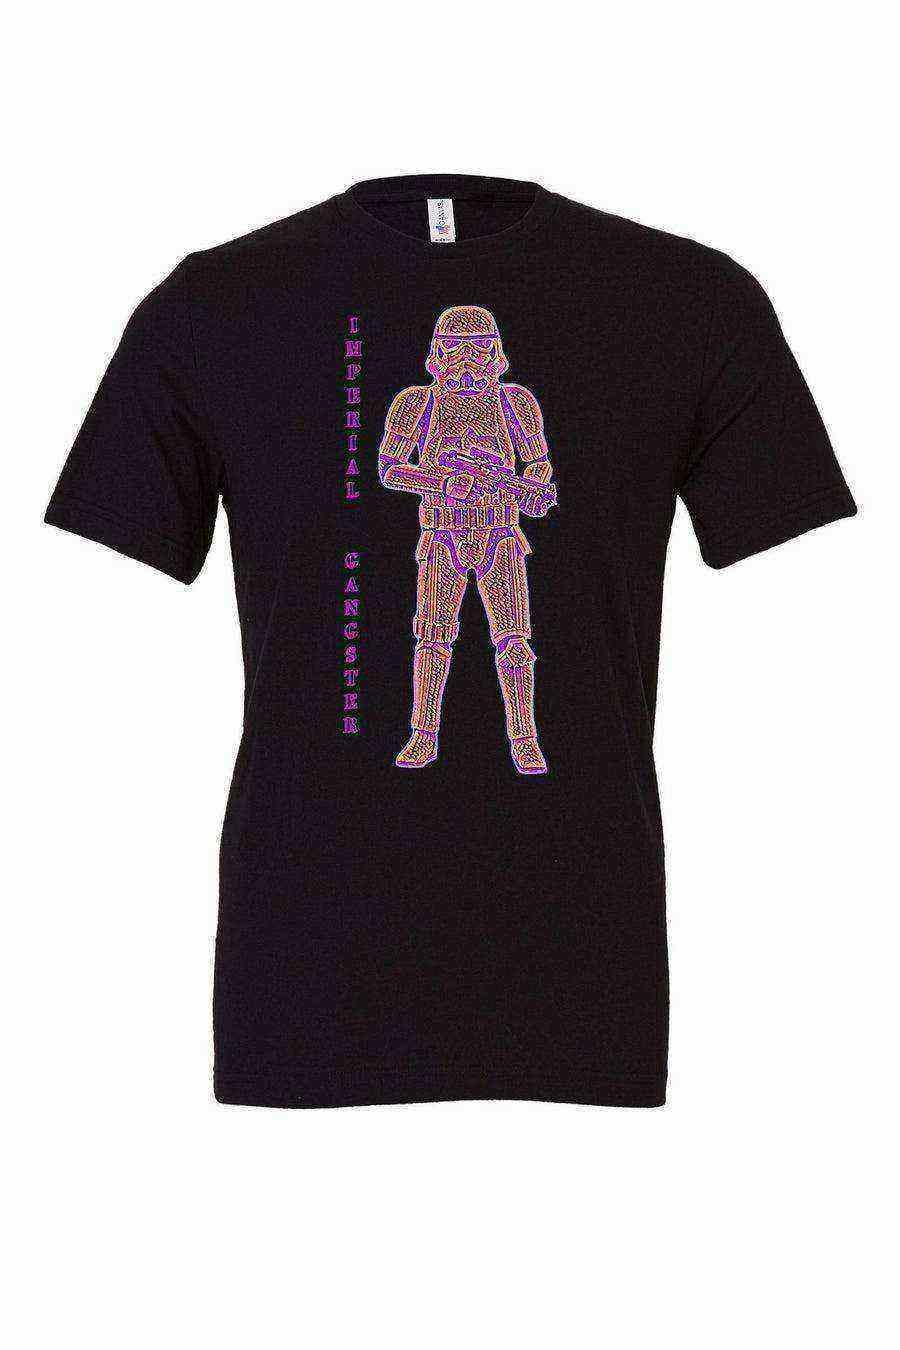 Youth | Imperial Gangster | Star Wars - Dylan's Tees